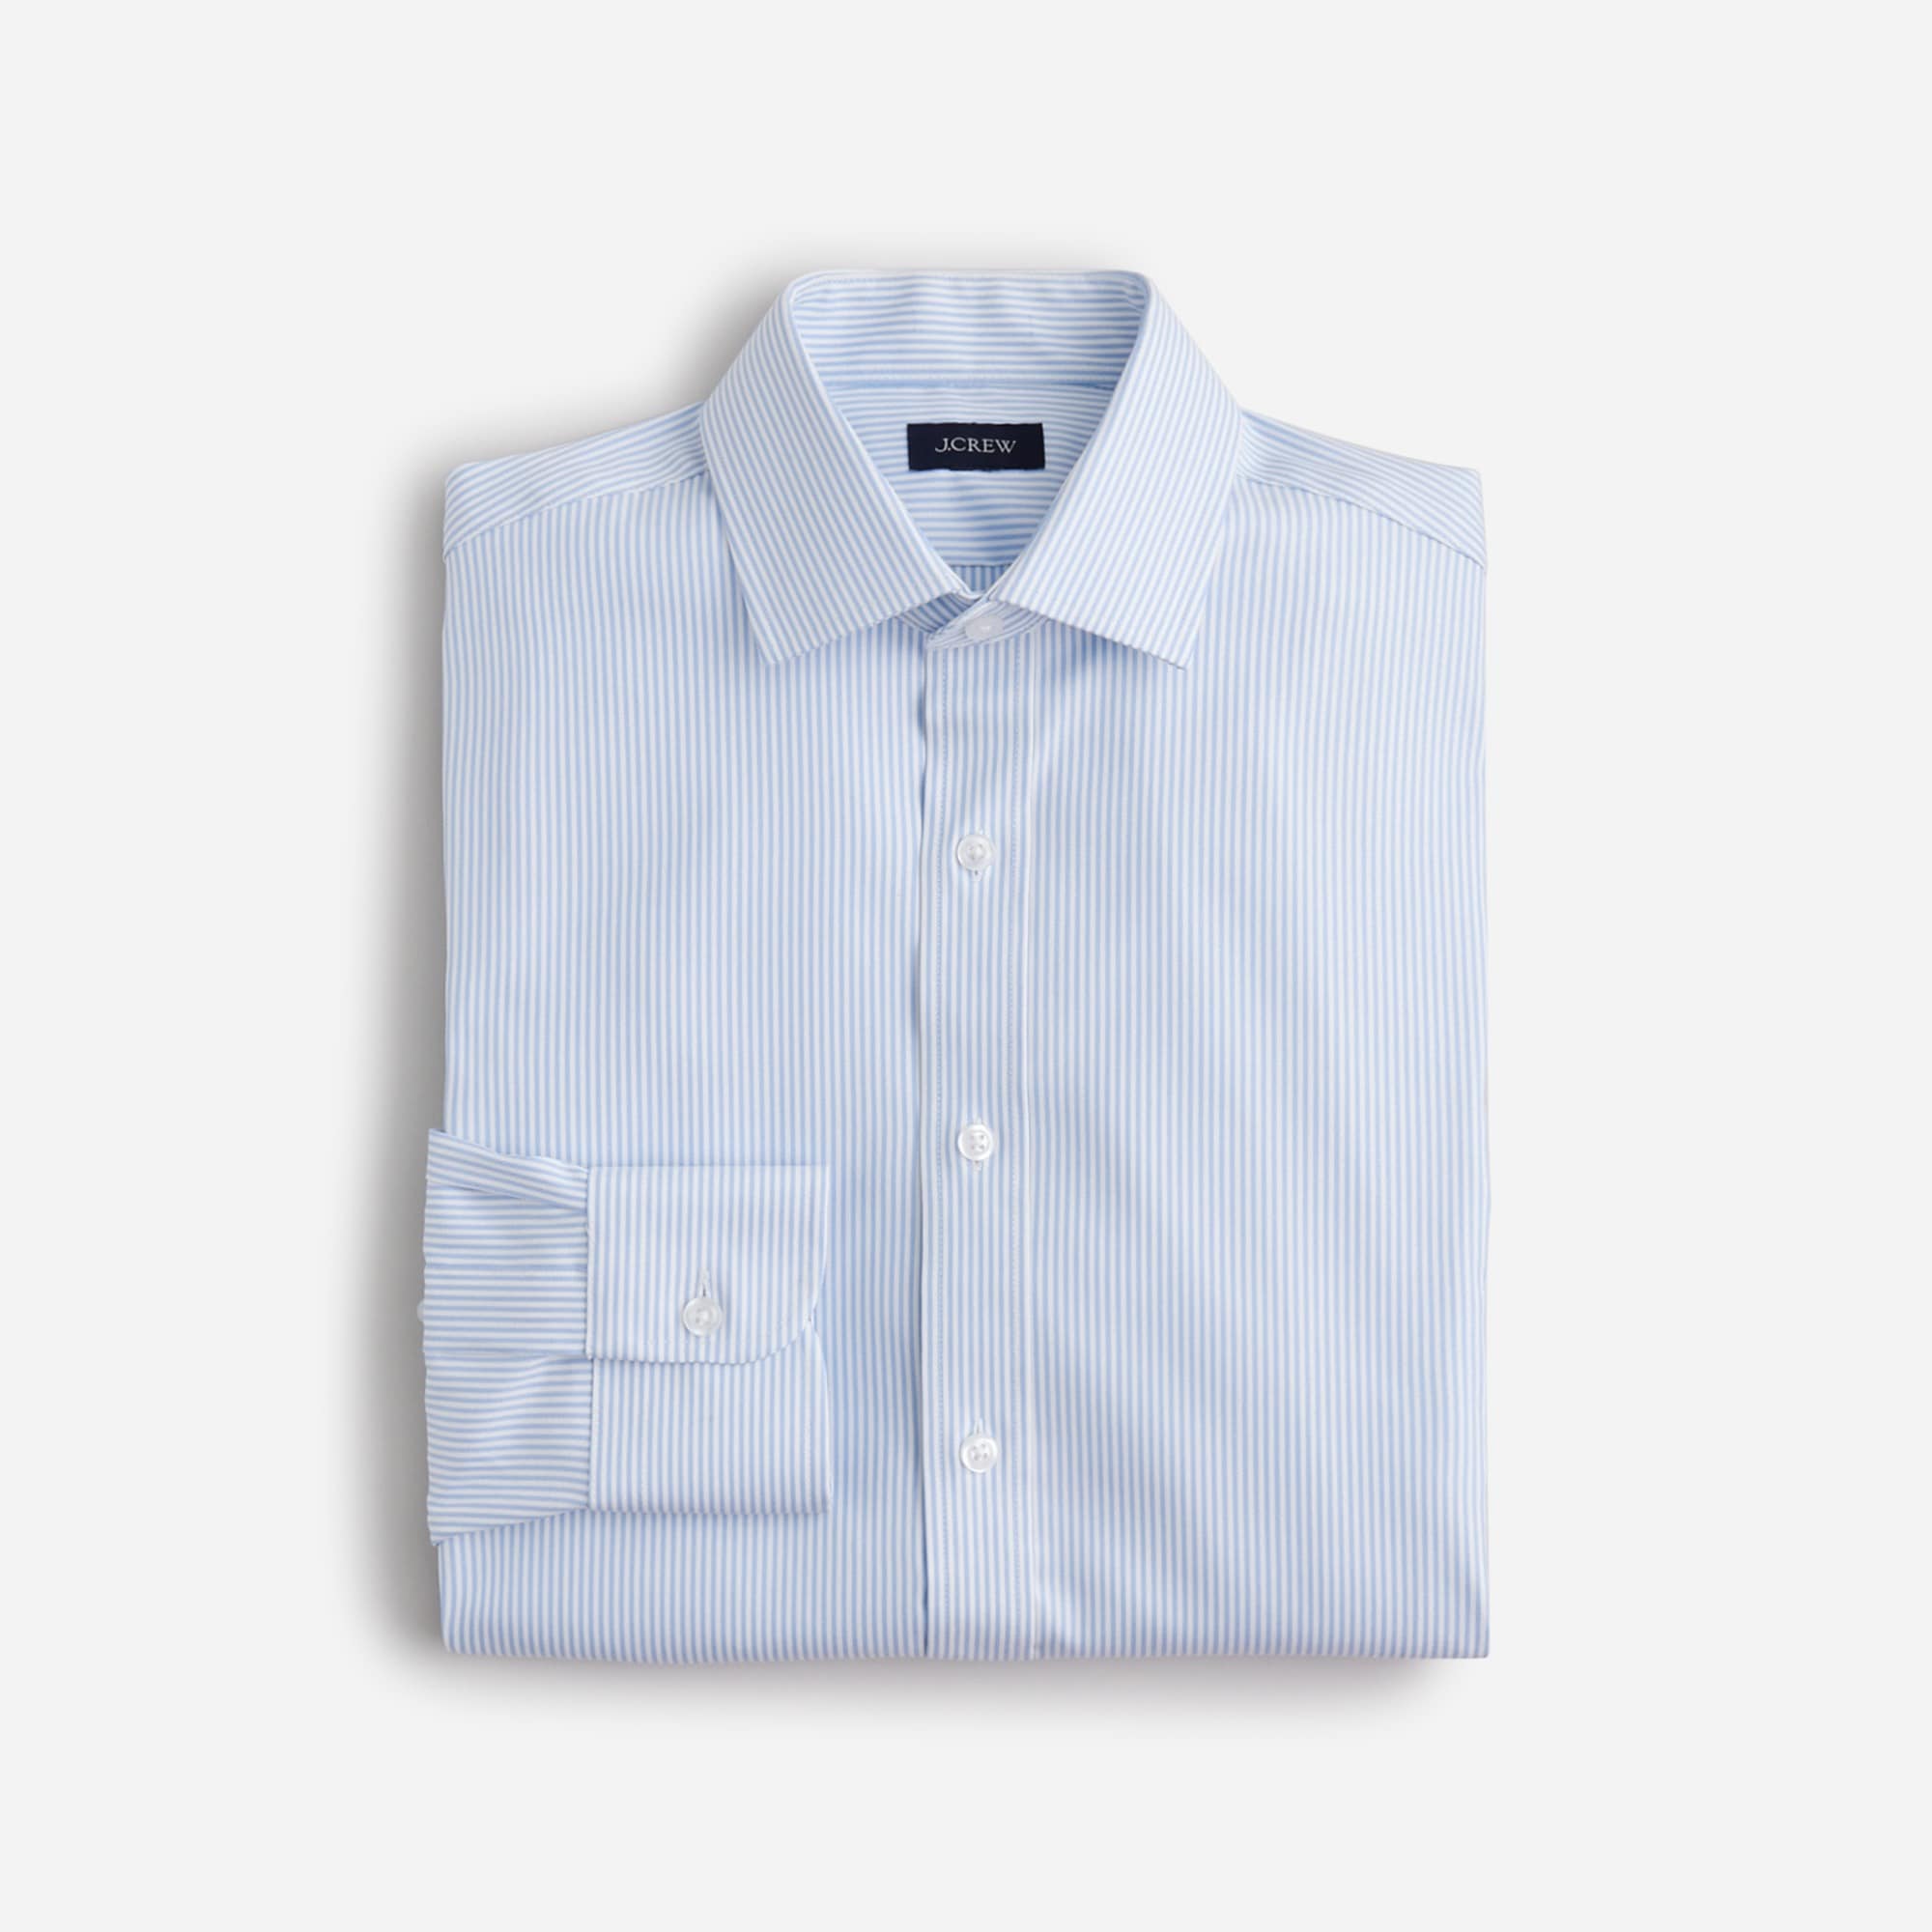  Tall Bowery performance stretch dress shirt with spread collar